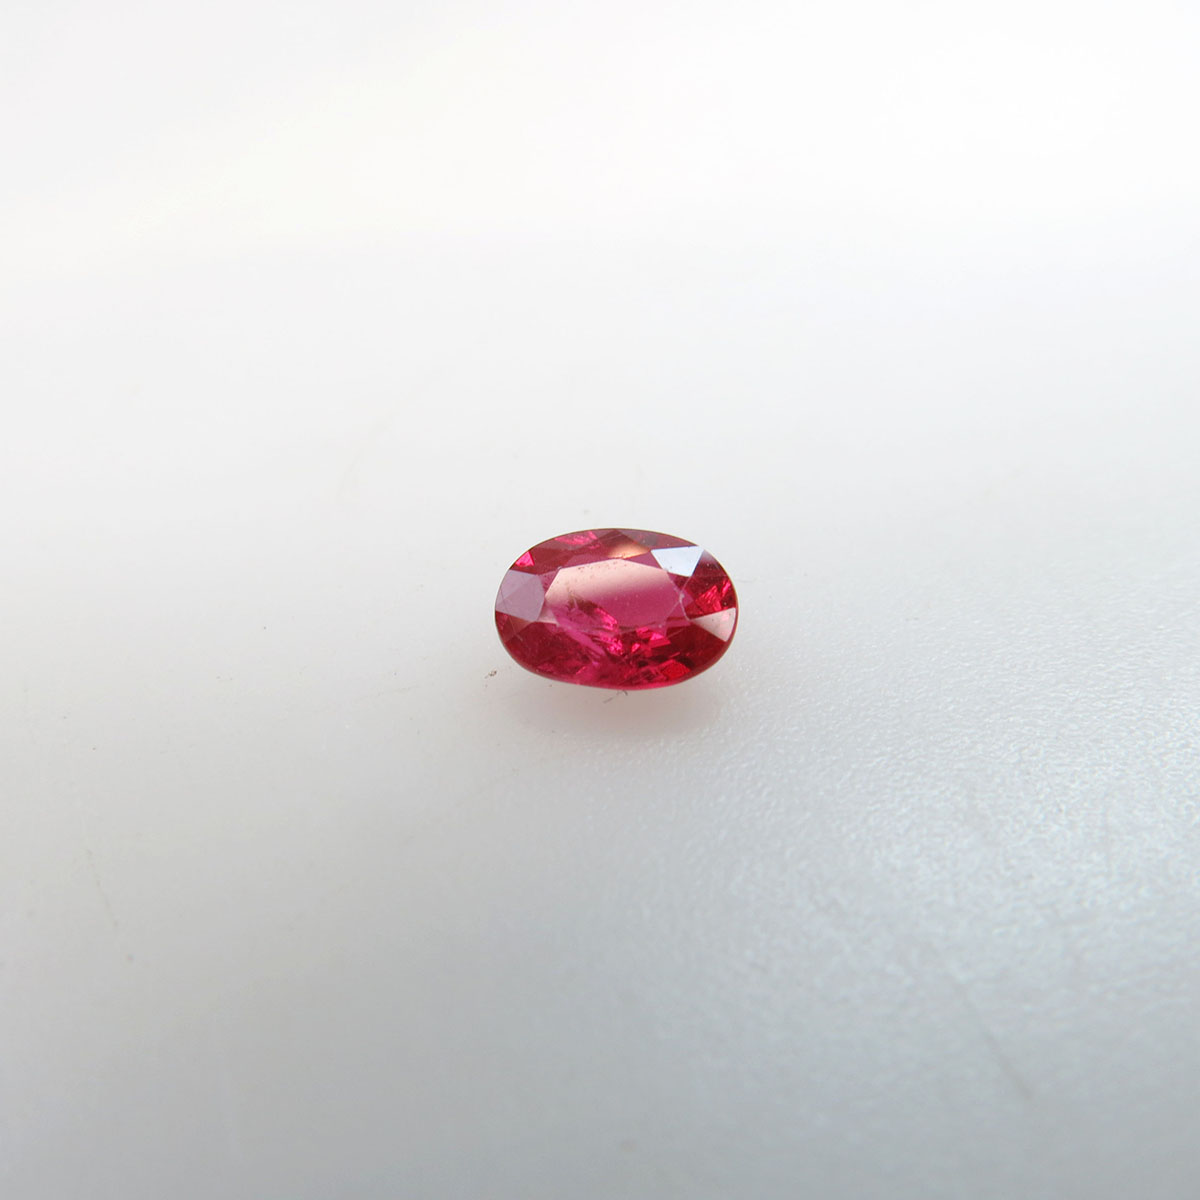 Unmounted Oval Cut Ruby